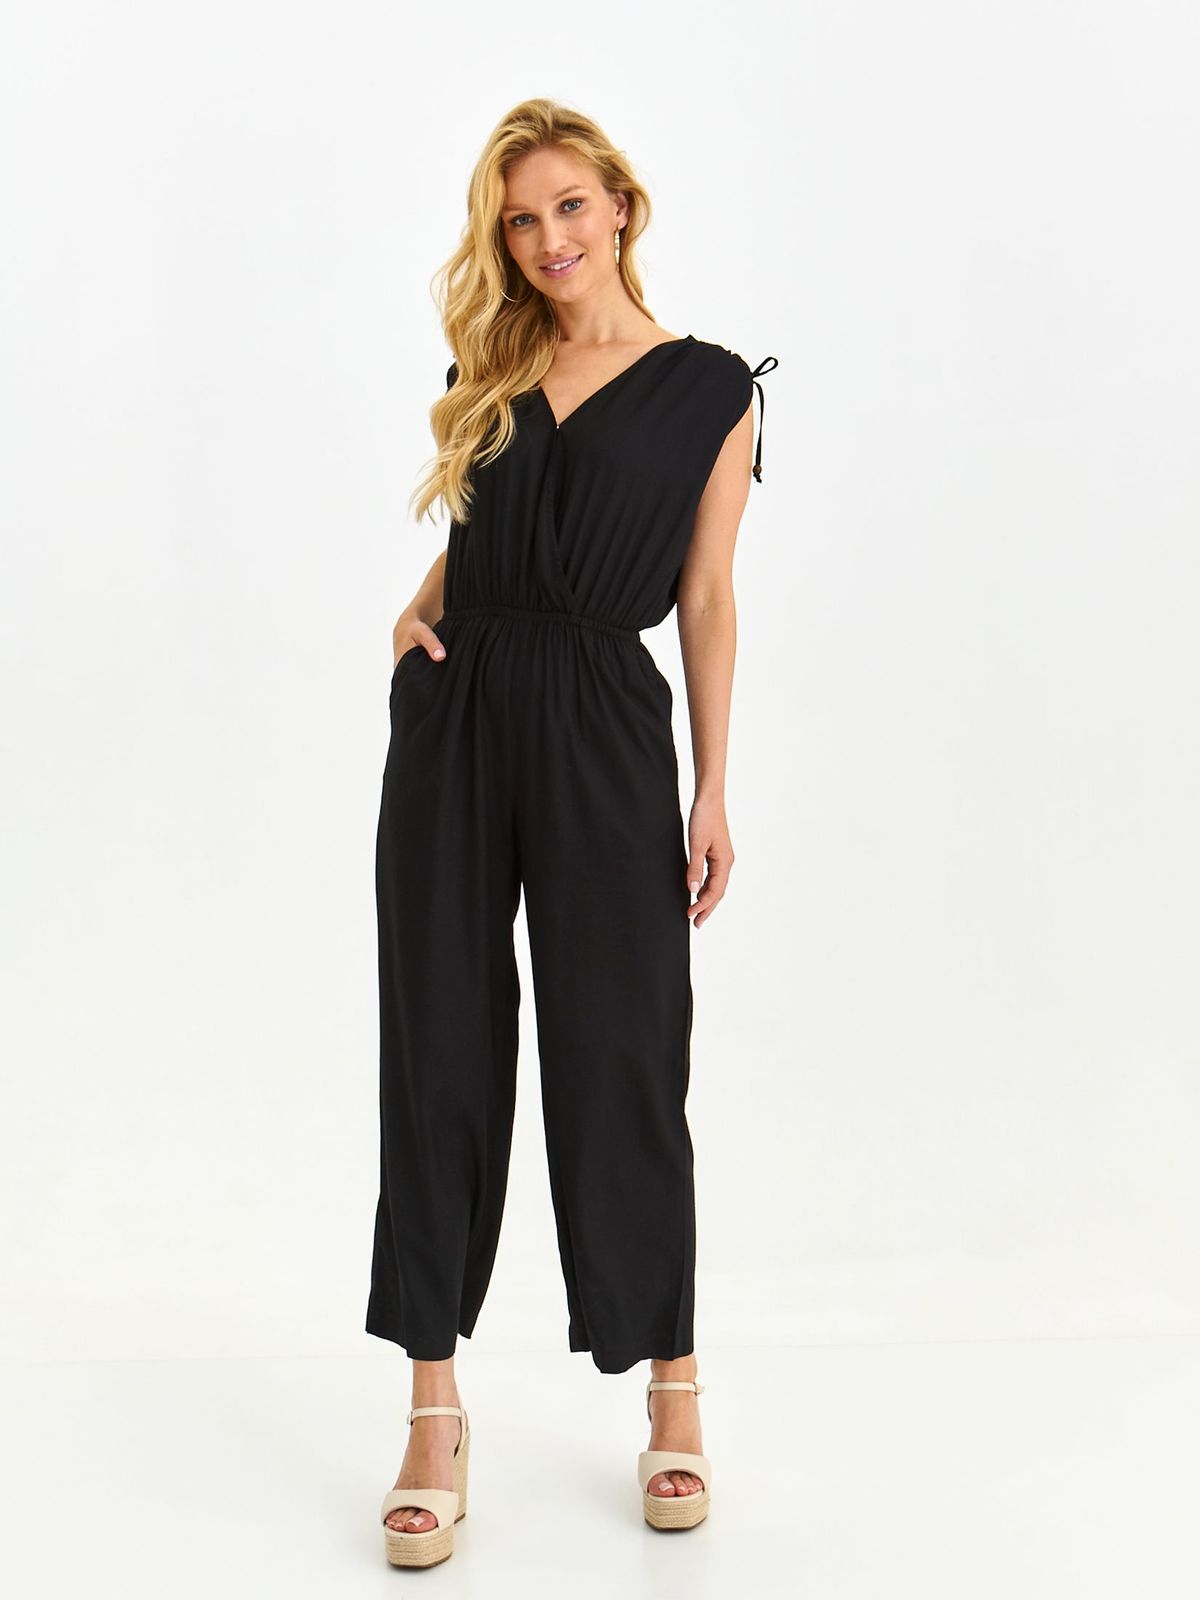 Black jumpsuit long with elastic waist lateral pockets light material